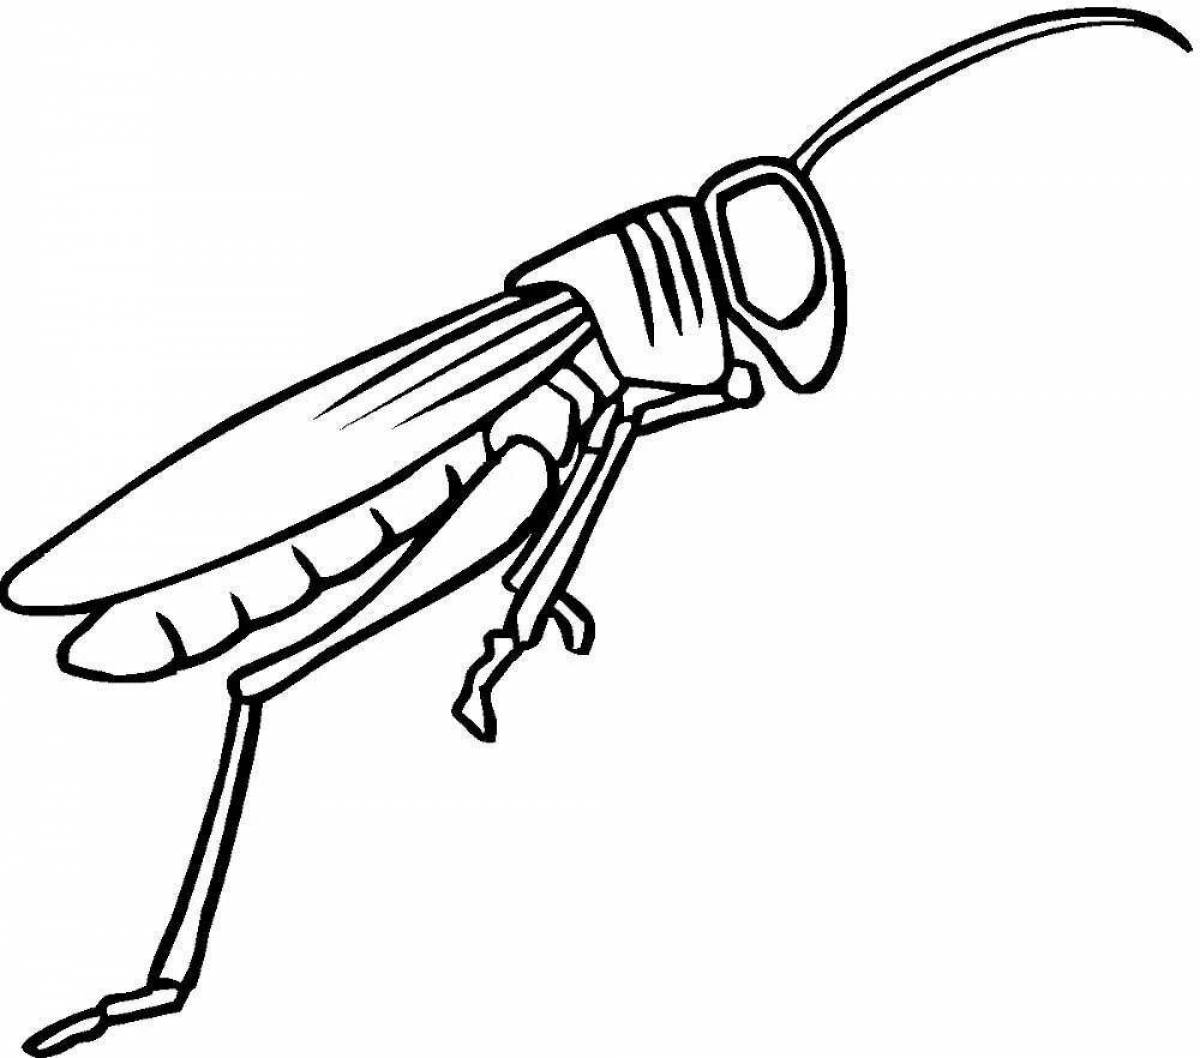 Glowing locust coloring page